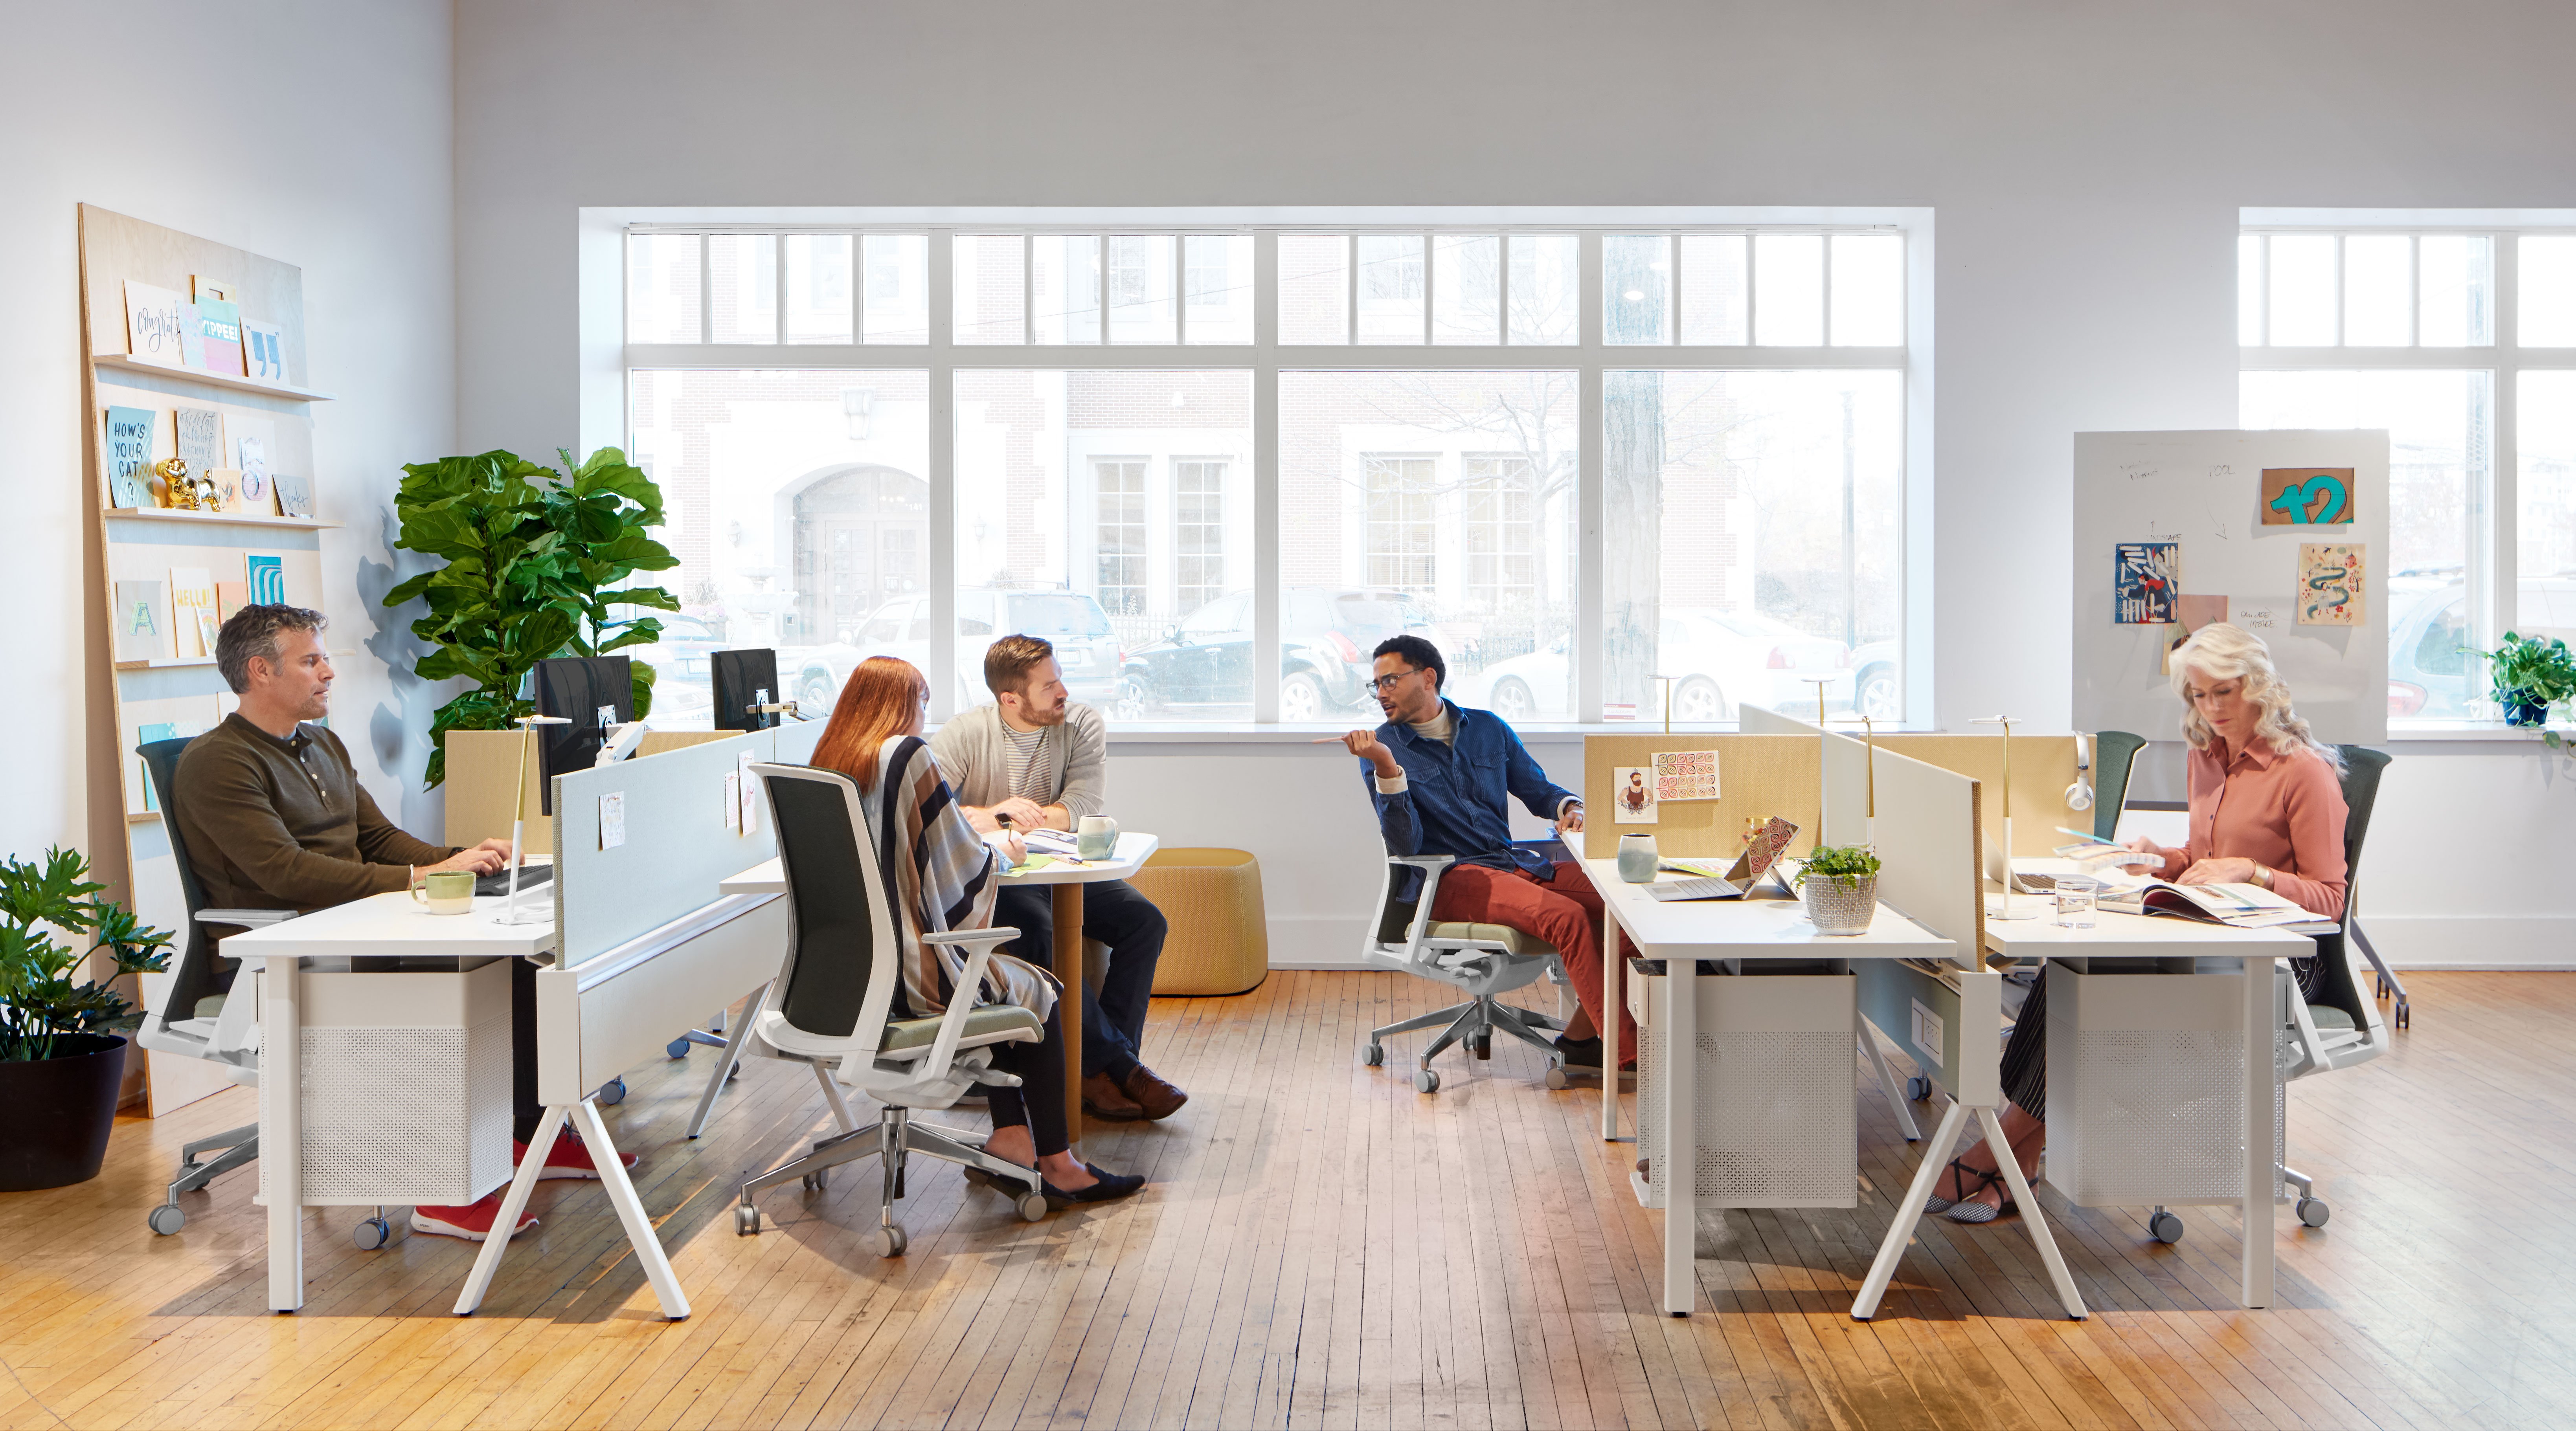 Haworth Compose Beam Workspace divider in an office space with employees interacting